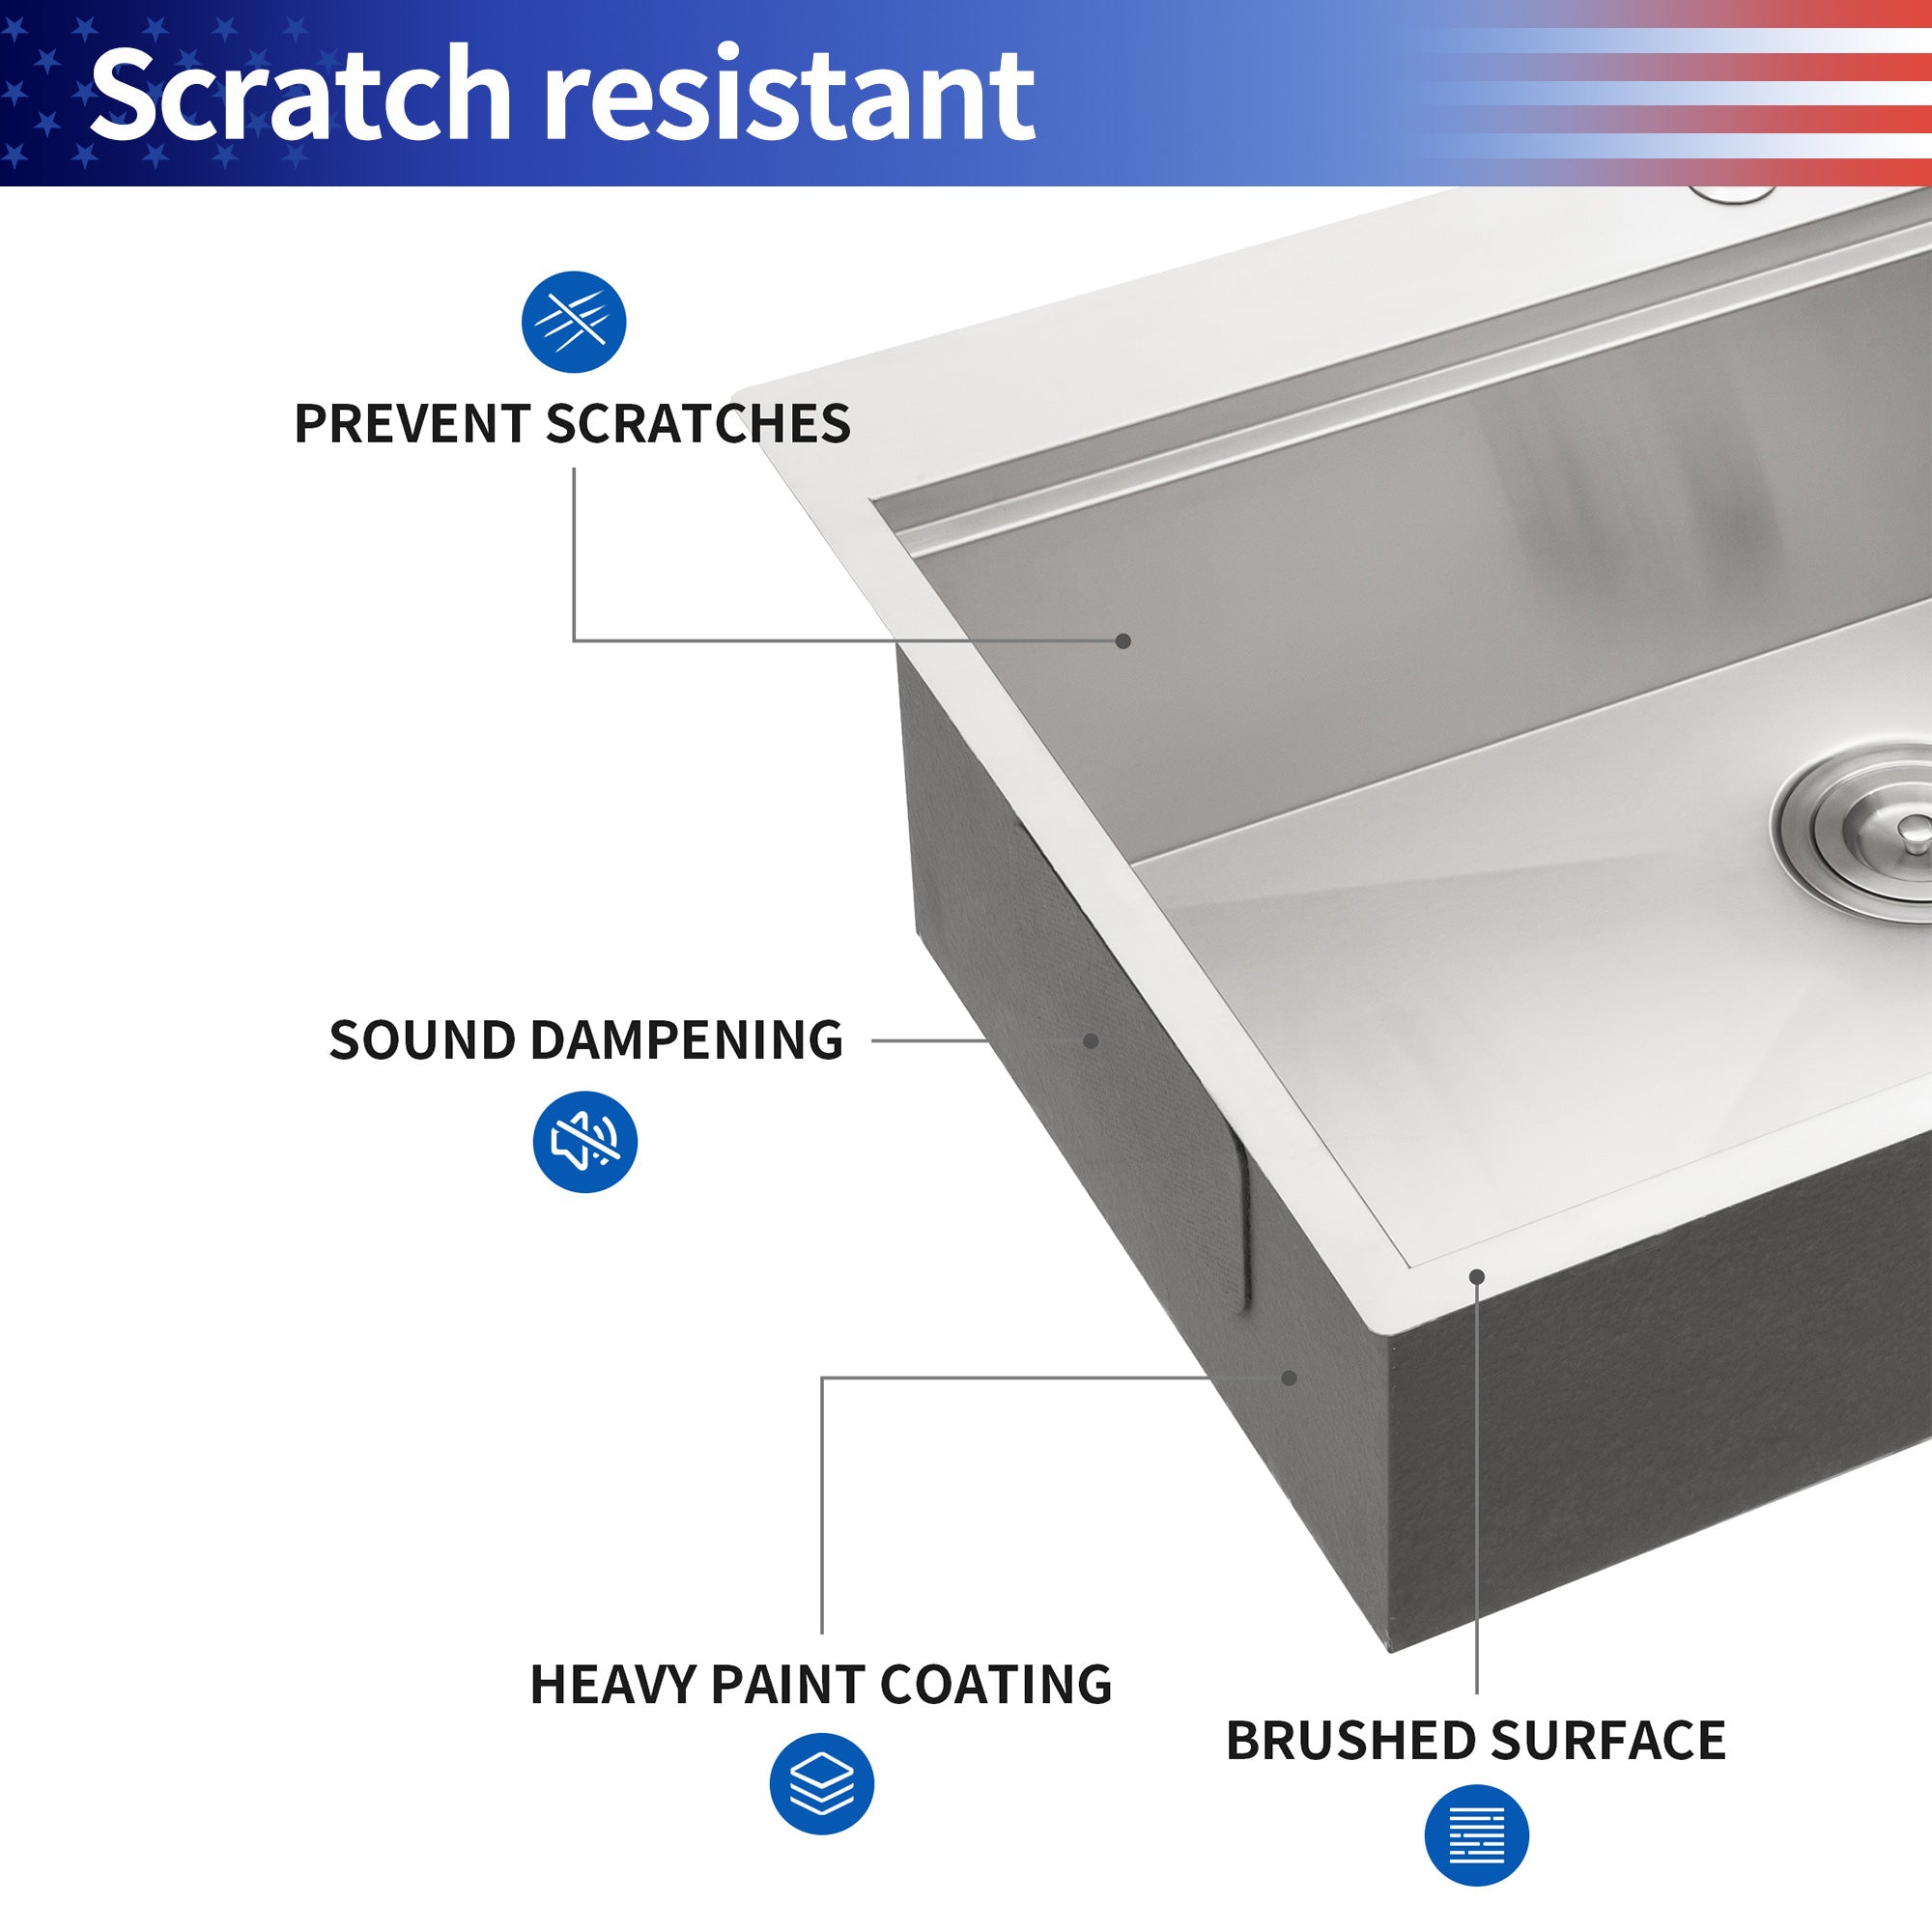 Drop-in Single Bowl Stainless Steel Kitchen Sink with Workstation RX-SS18